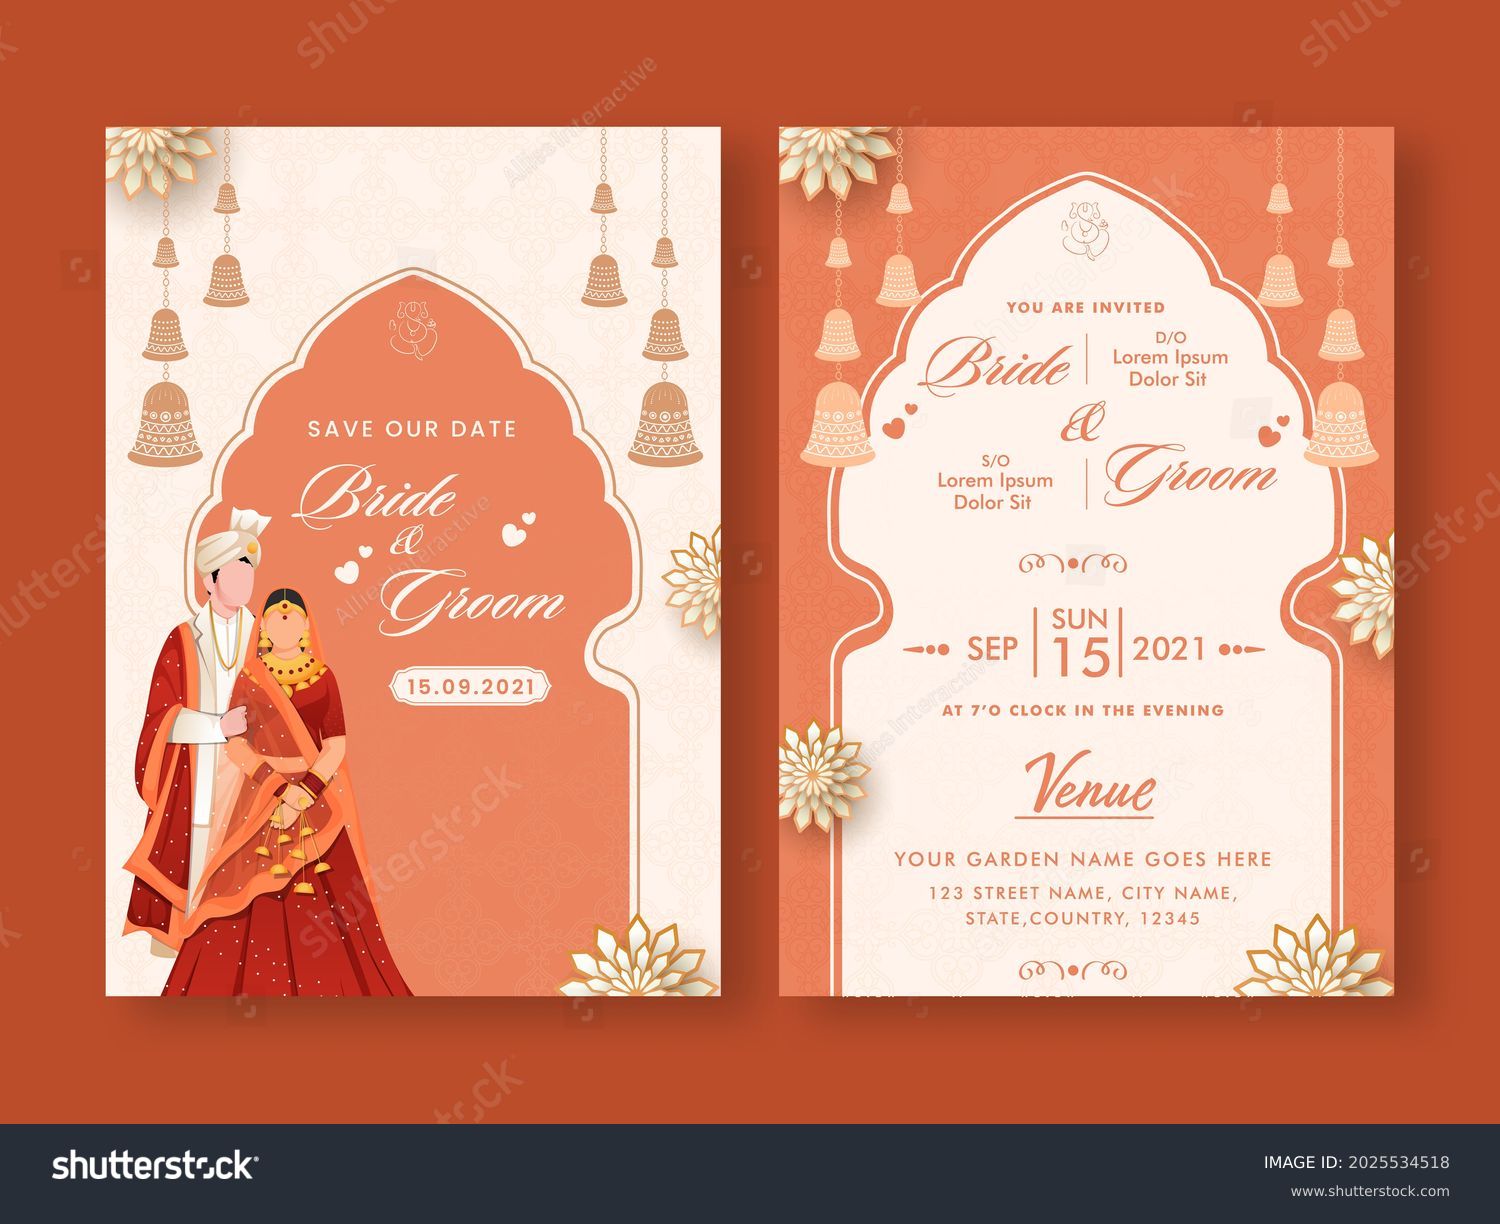 Wedding Invitation Template Layout With Indian Couple Image In White And Orange Color. #2025534518